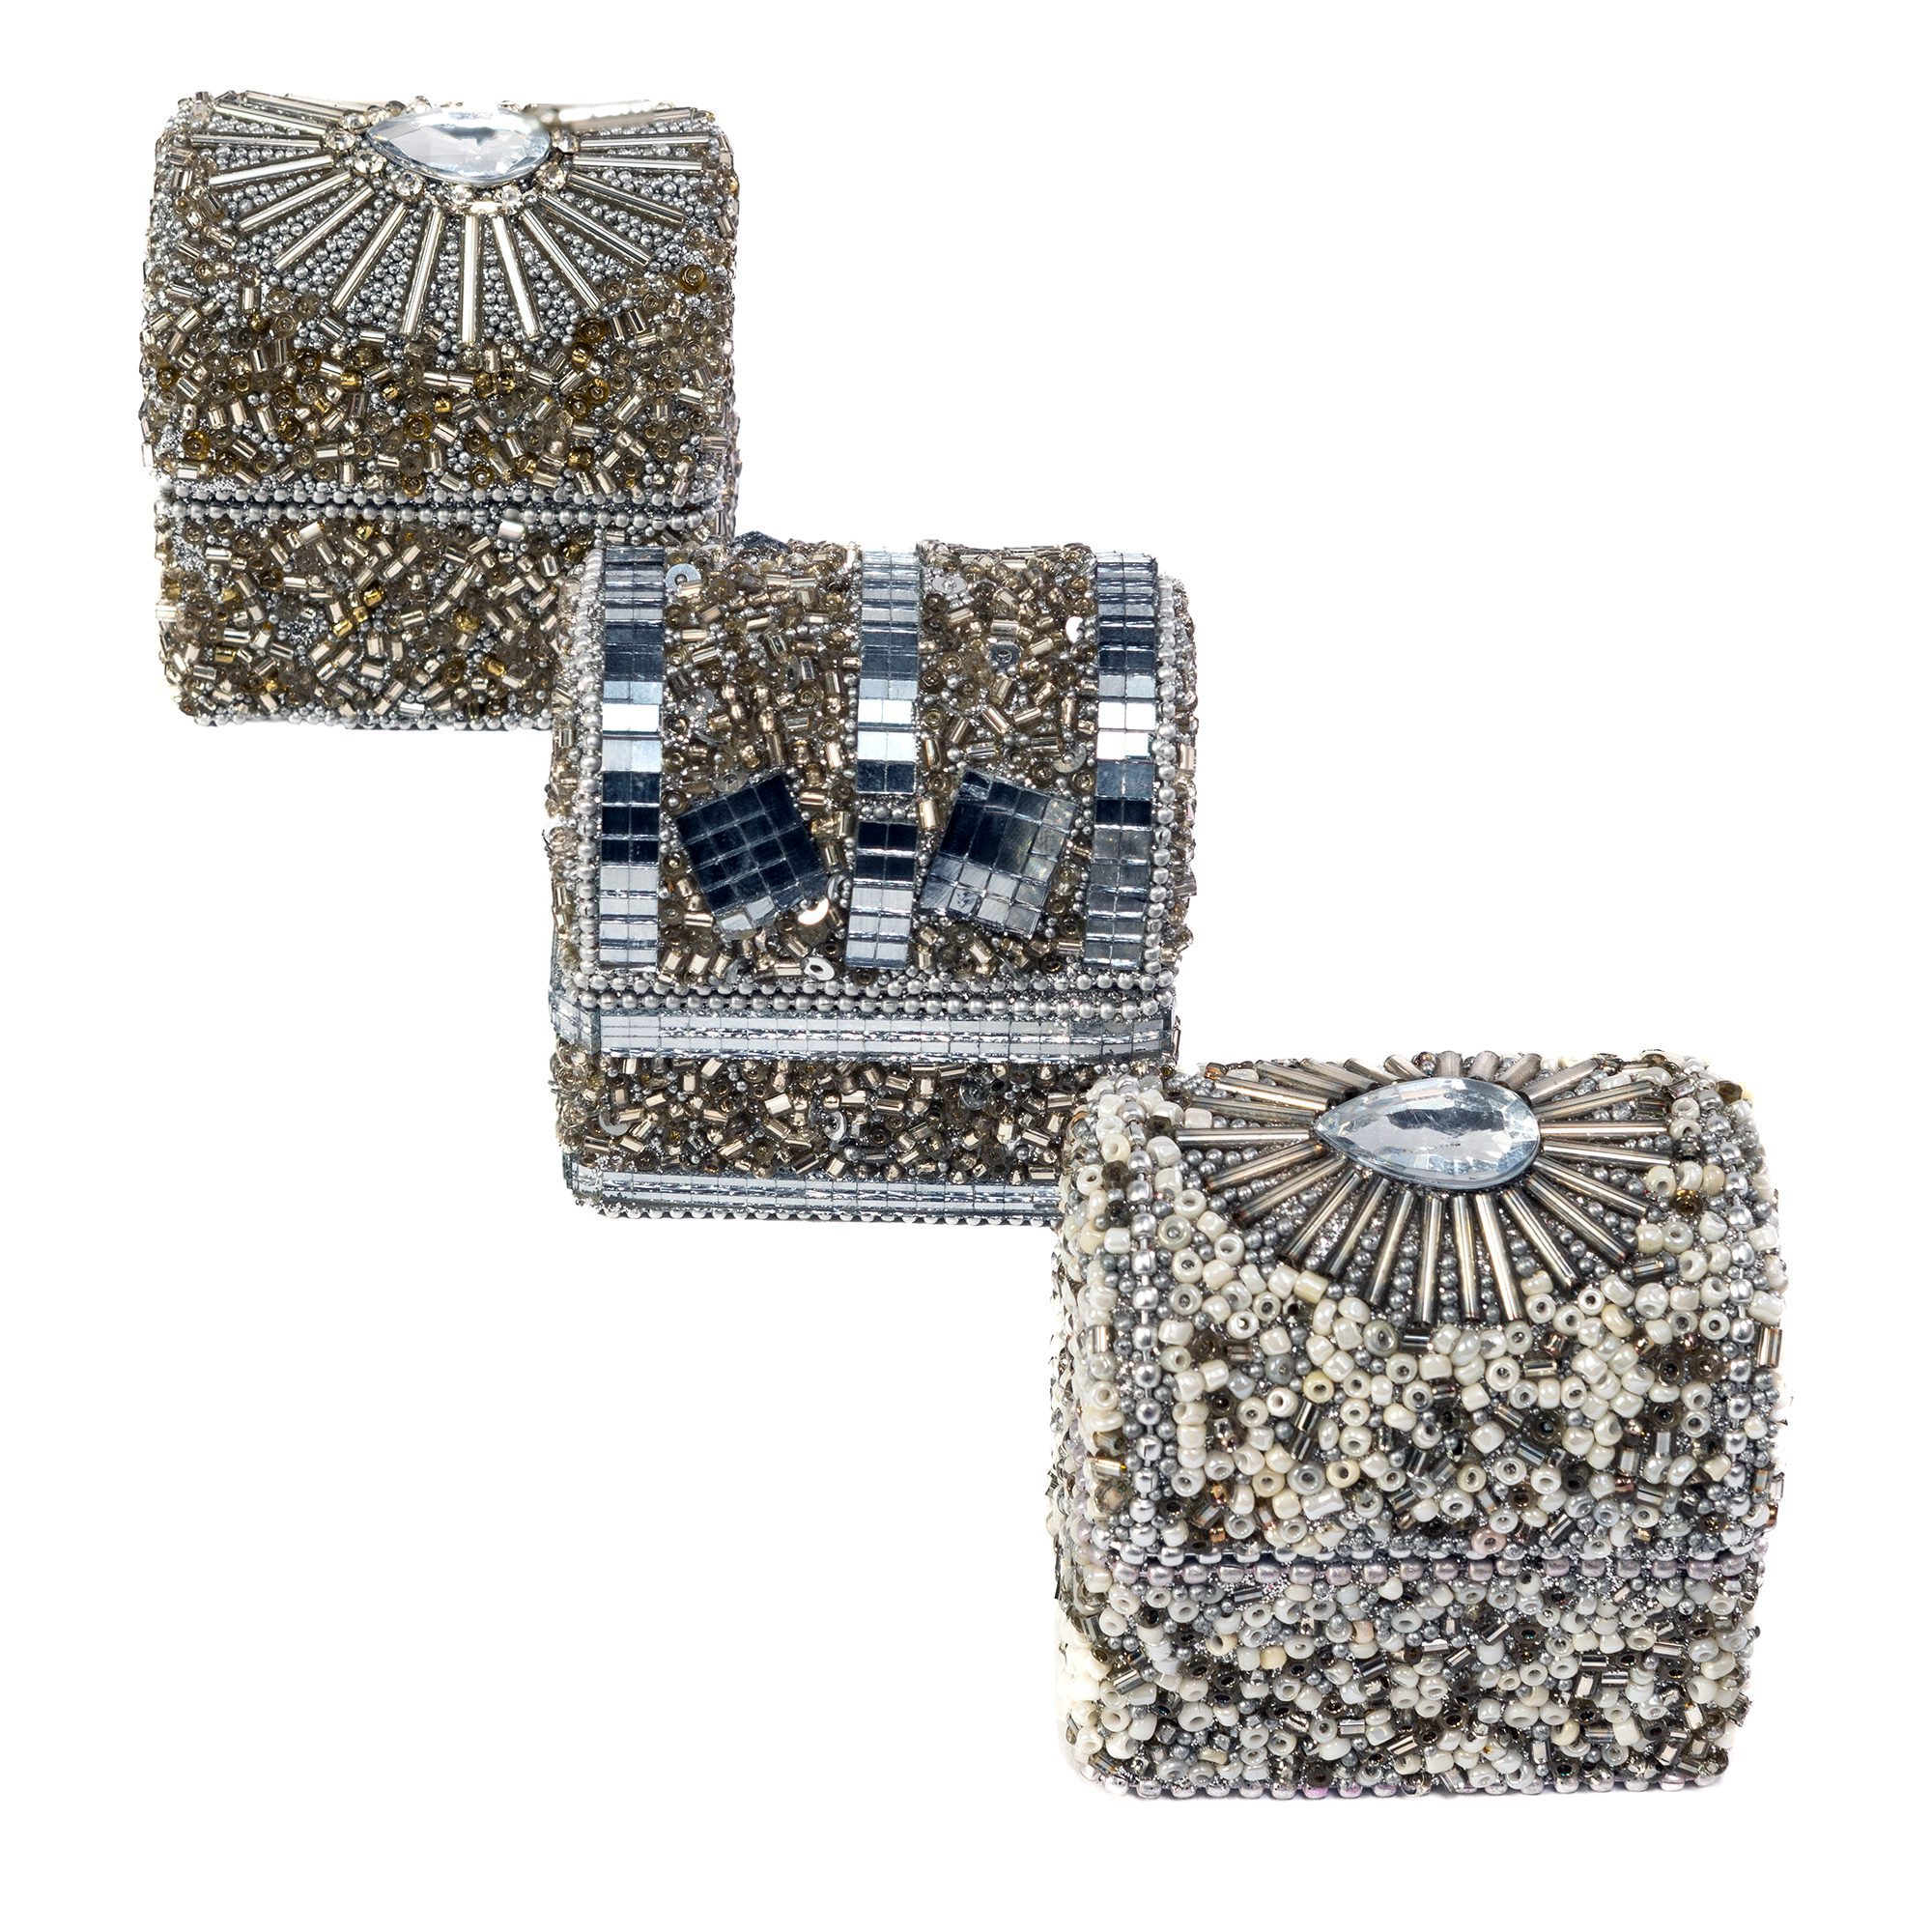 Opulent and refined these luxurious trinket boxes seamlessly blend sophistication and functionality.